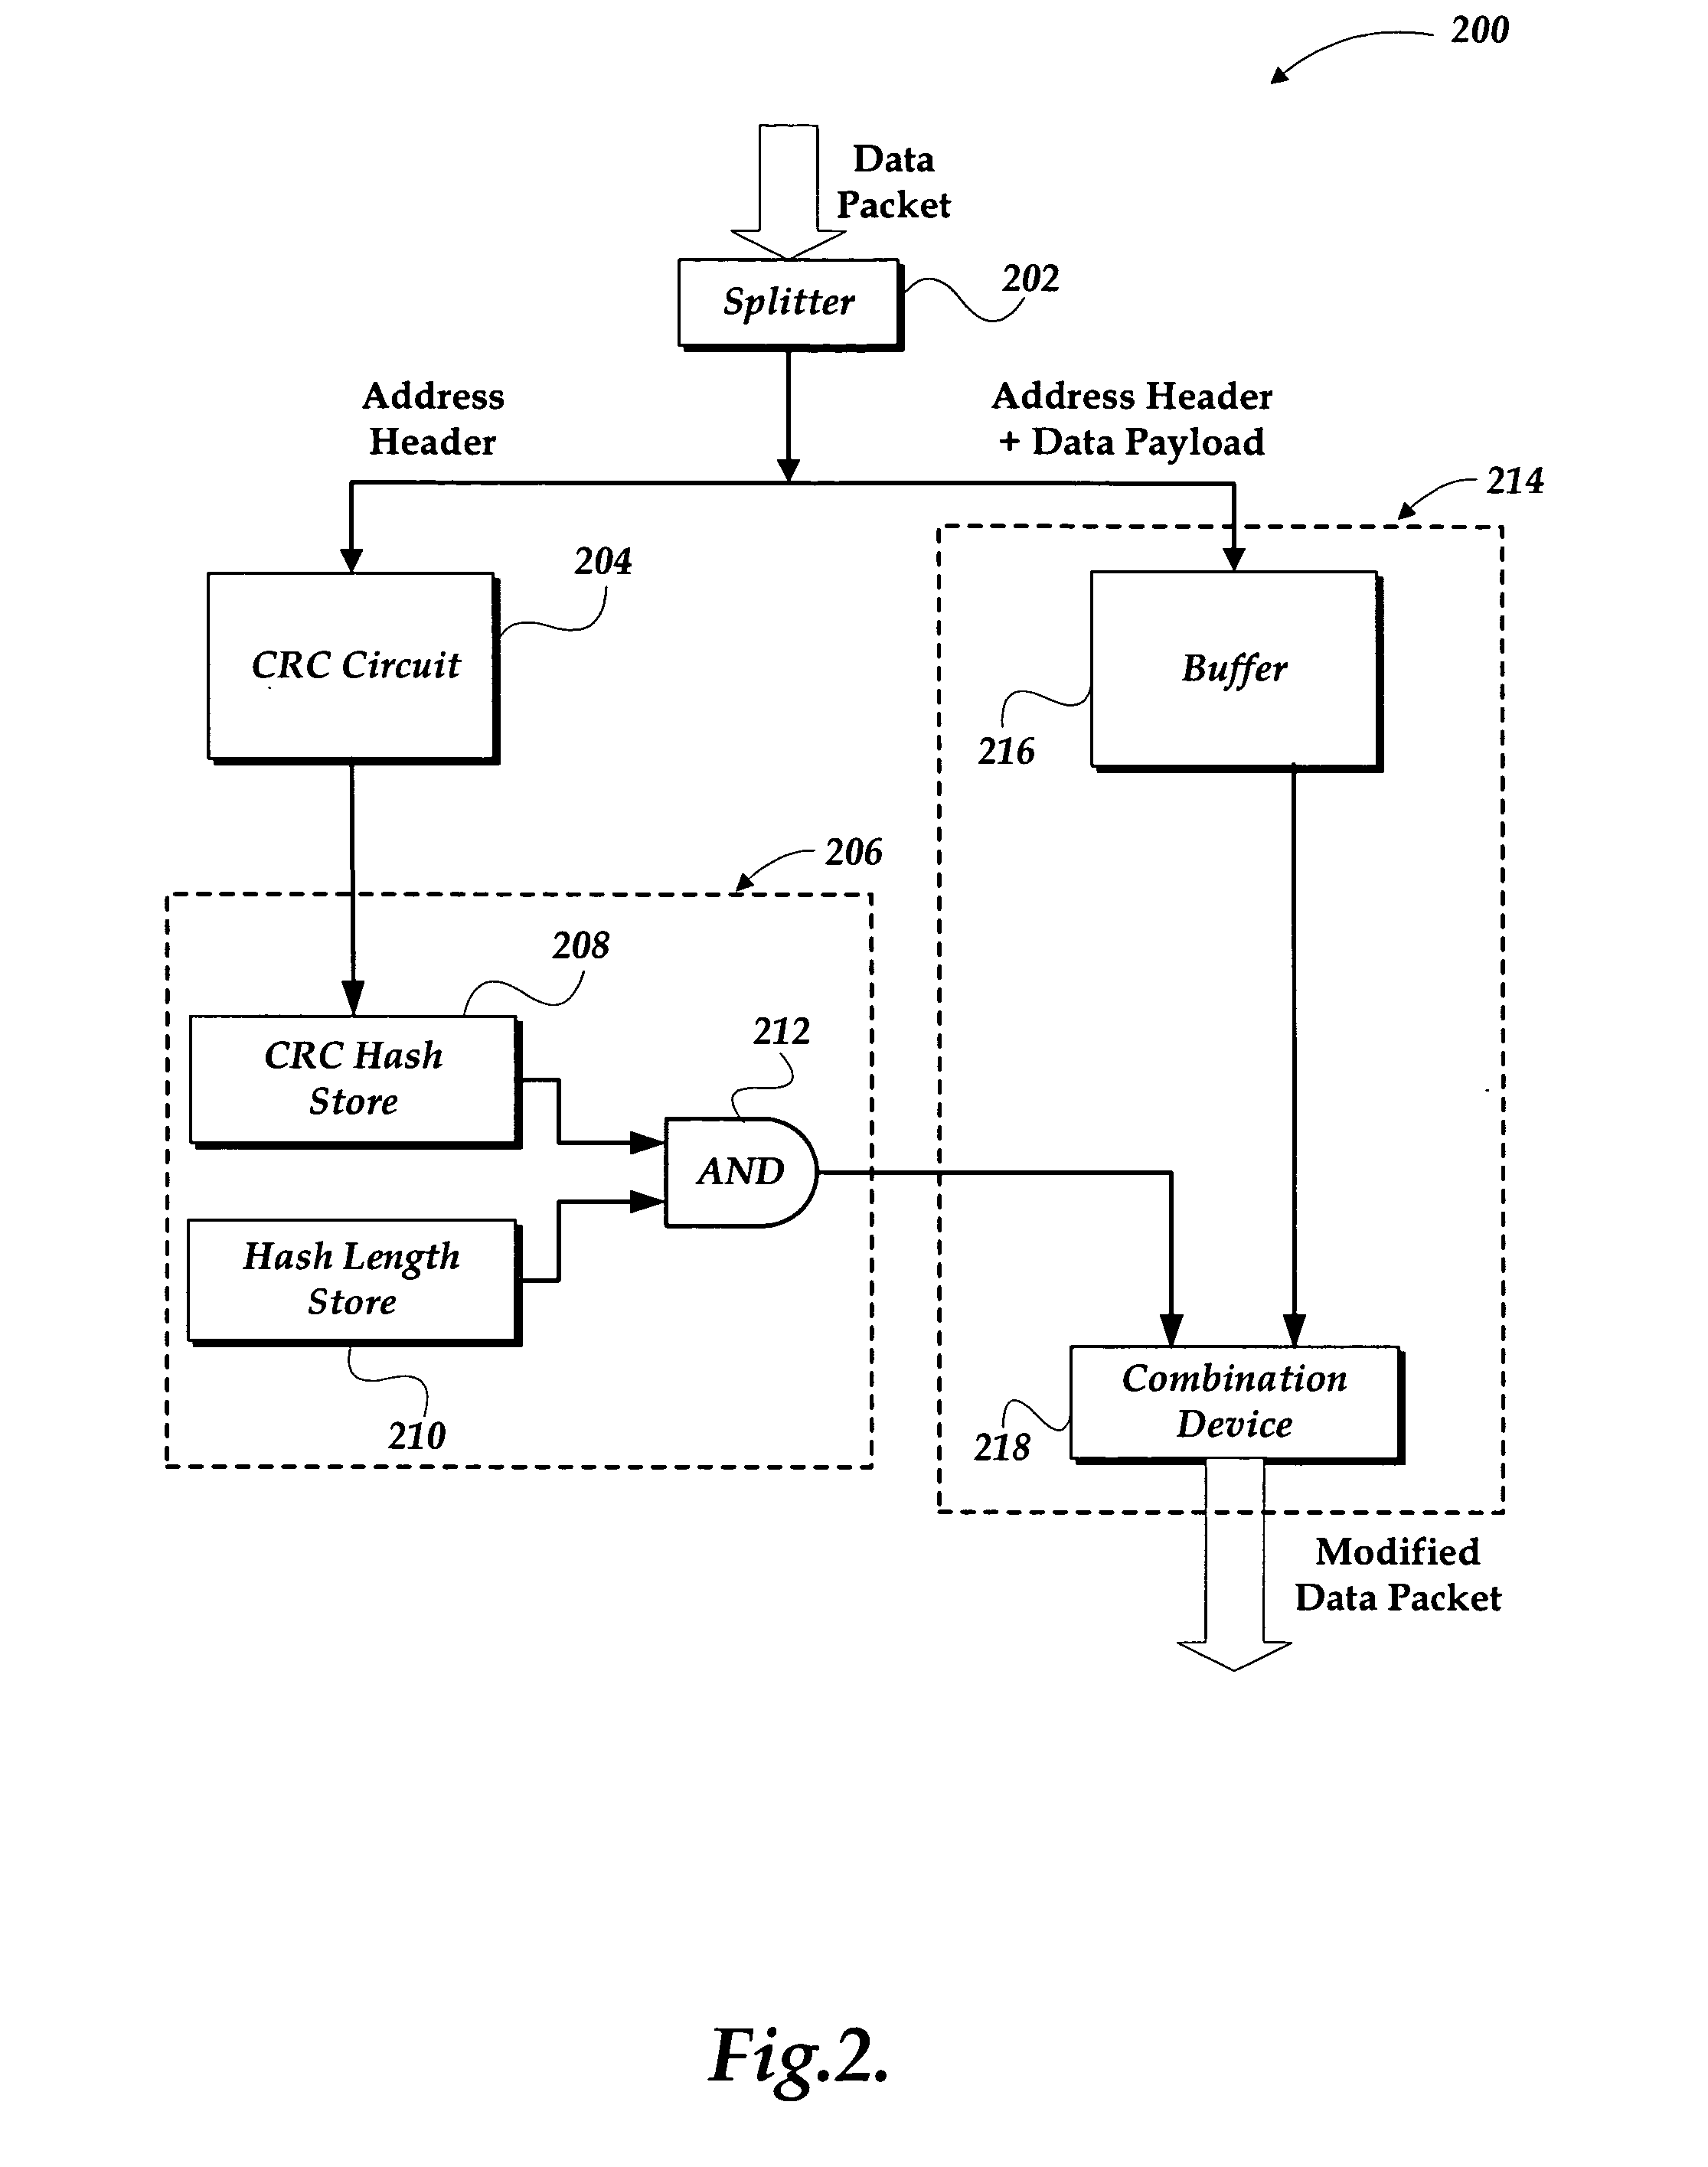 Method and apparatus for managing network traffic using cyclical redundancy check hash functions